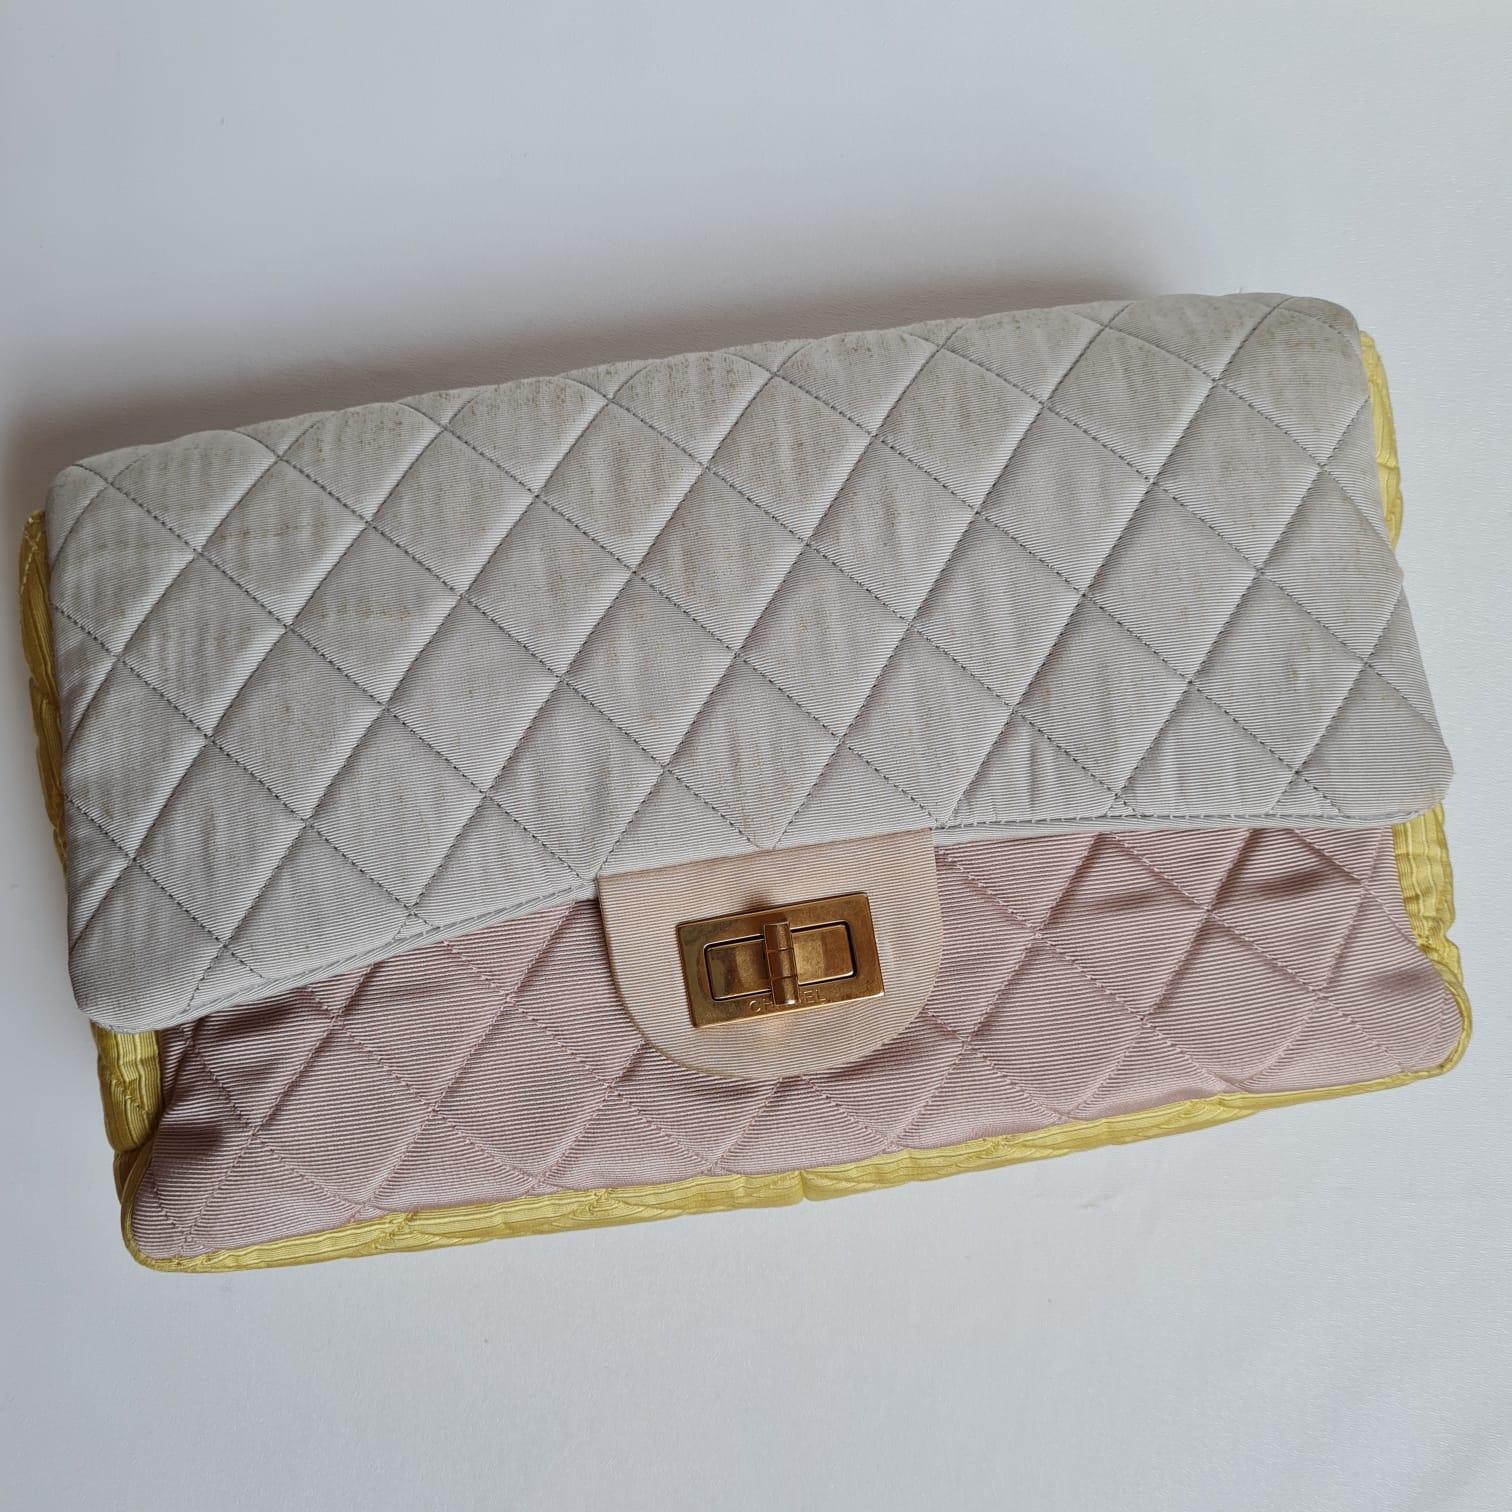 Chanel Pastel Tricolor 2.55 Canvas Quilted 227 Reissue Flap Bag For Sale 1